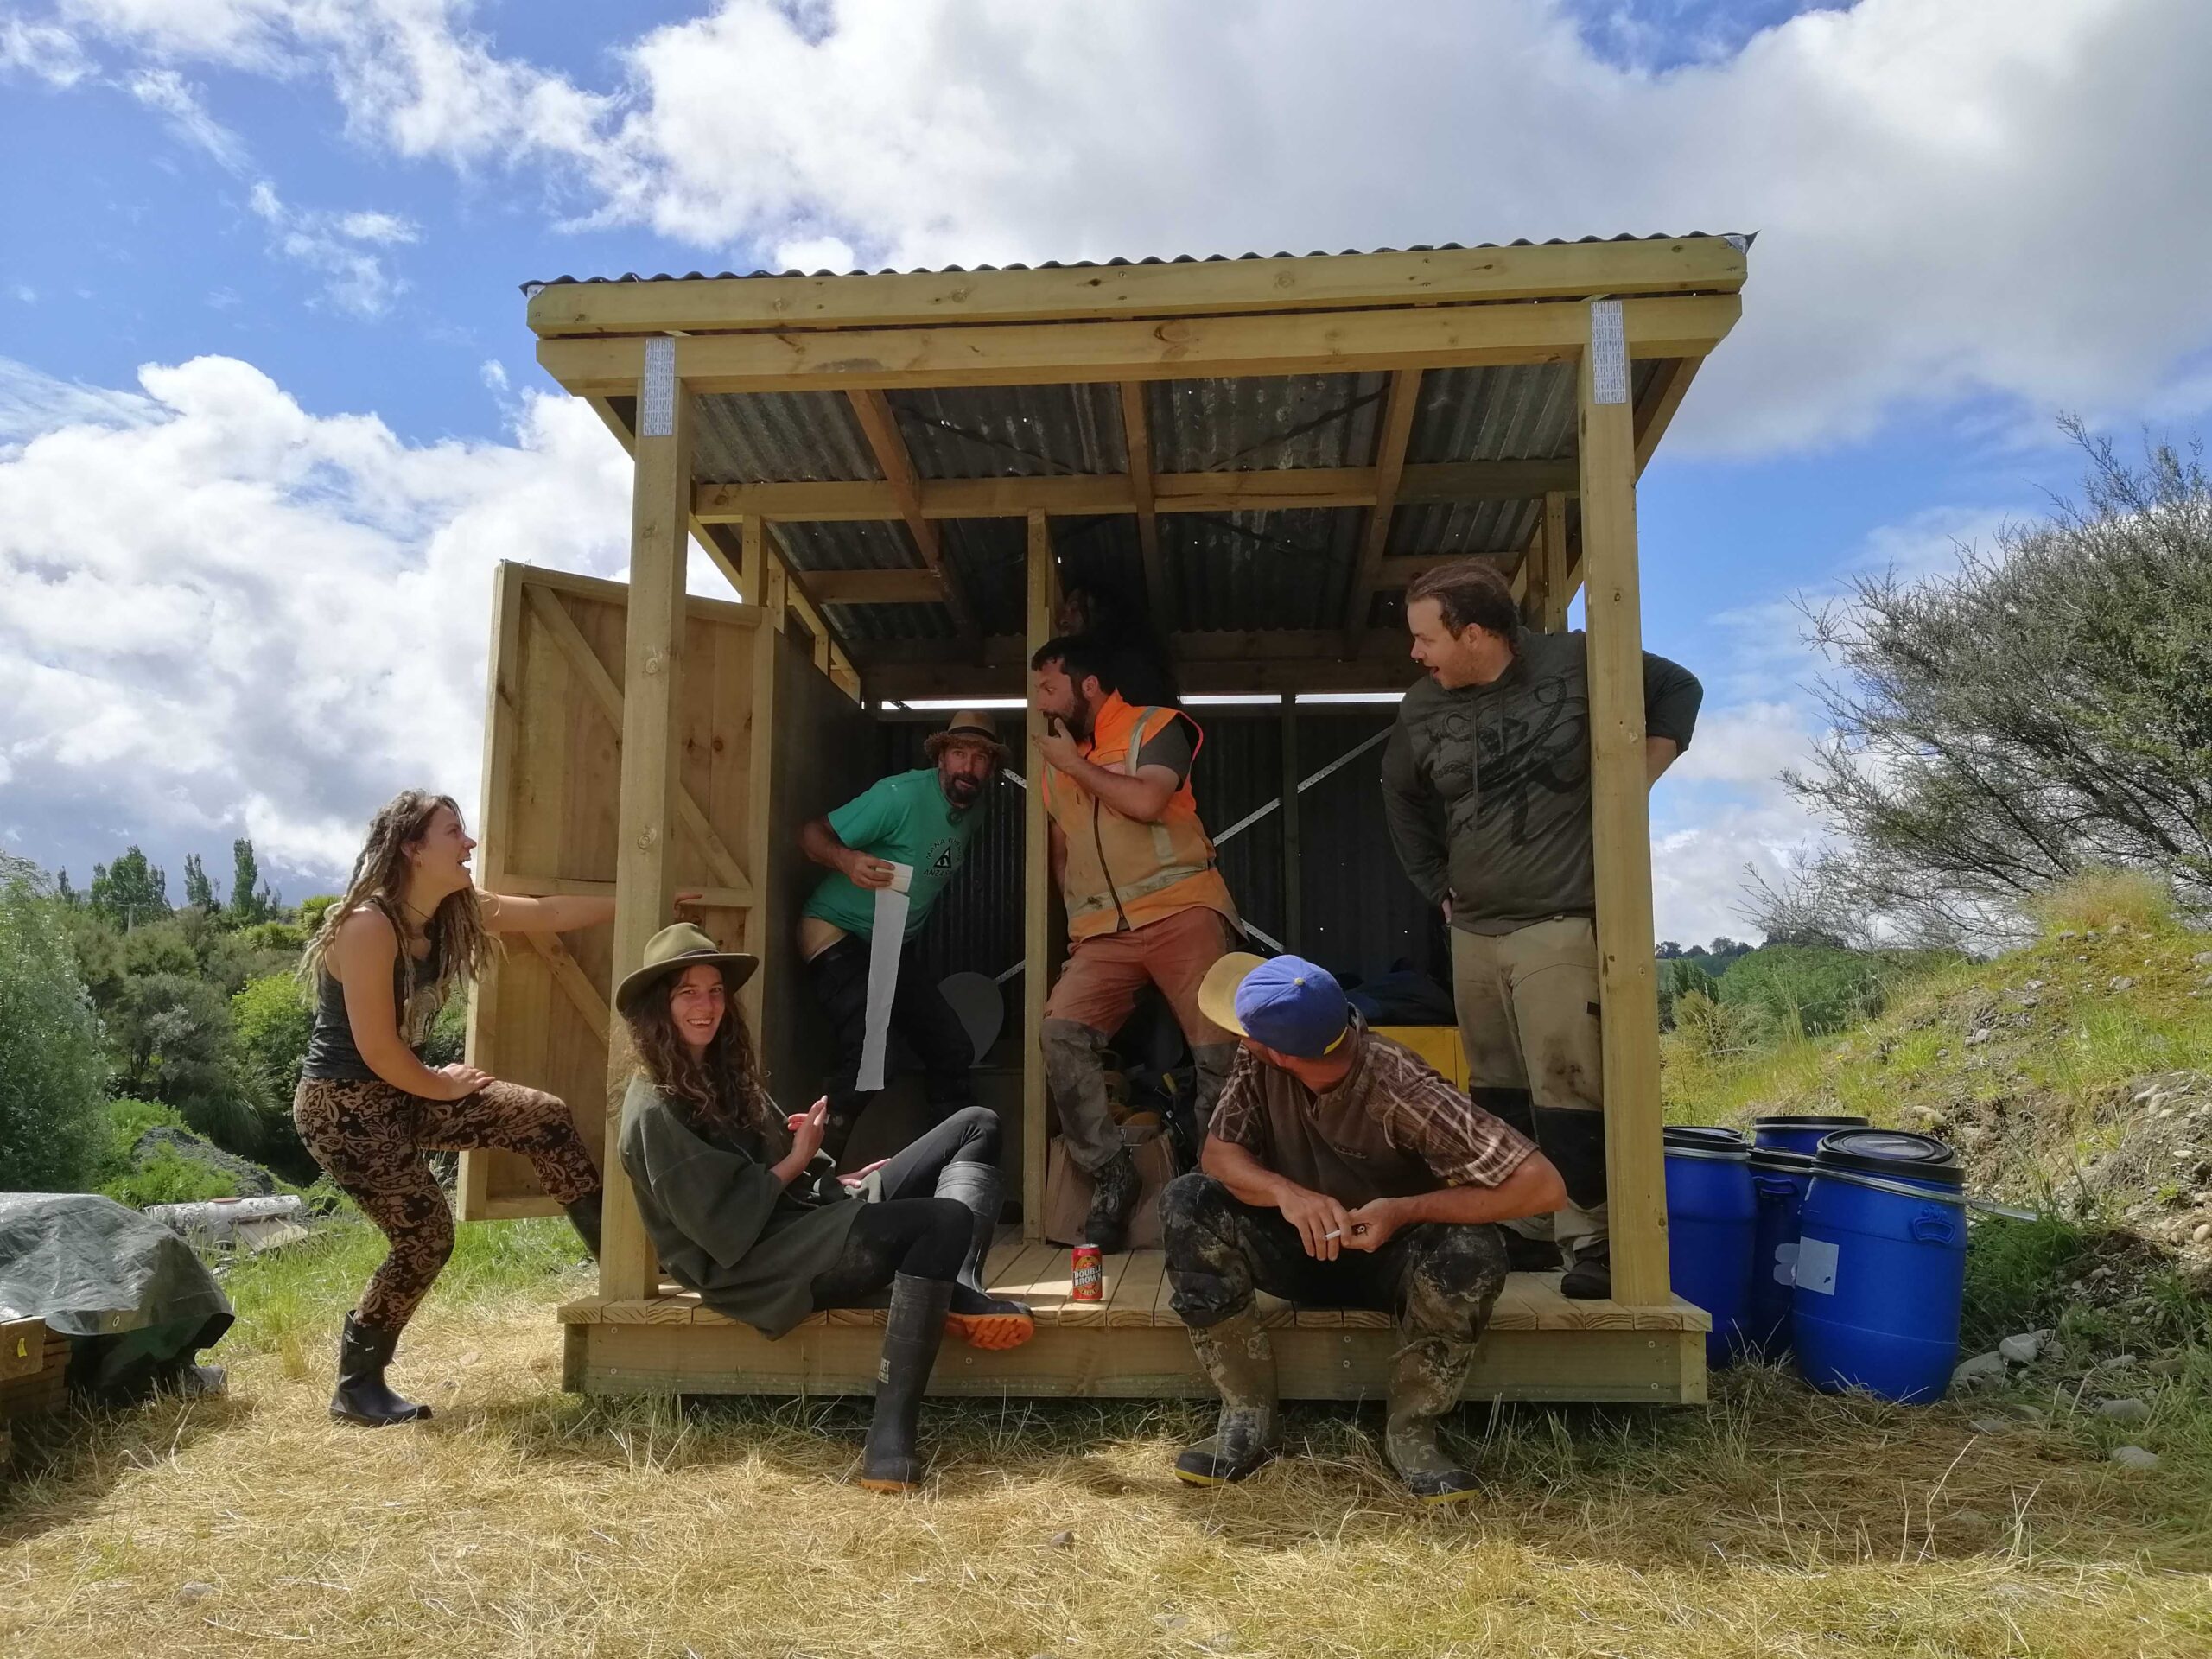 Six volunteers stand in front of a partially built wooden composting toilet building pulling silly poses